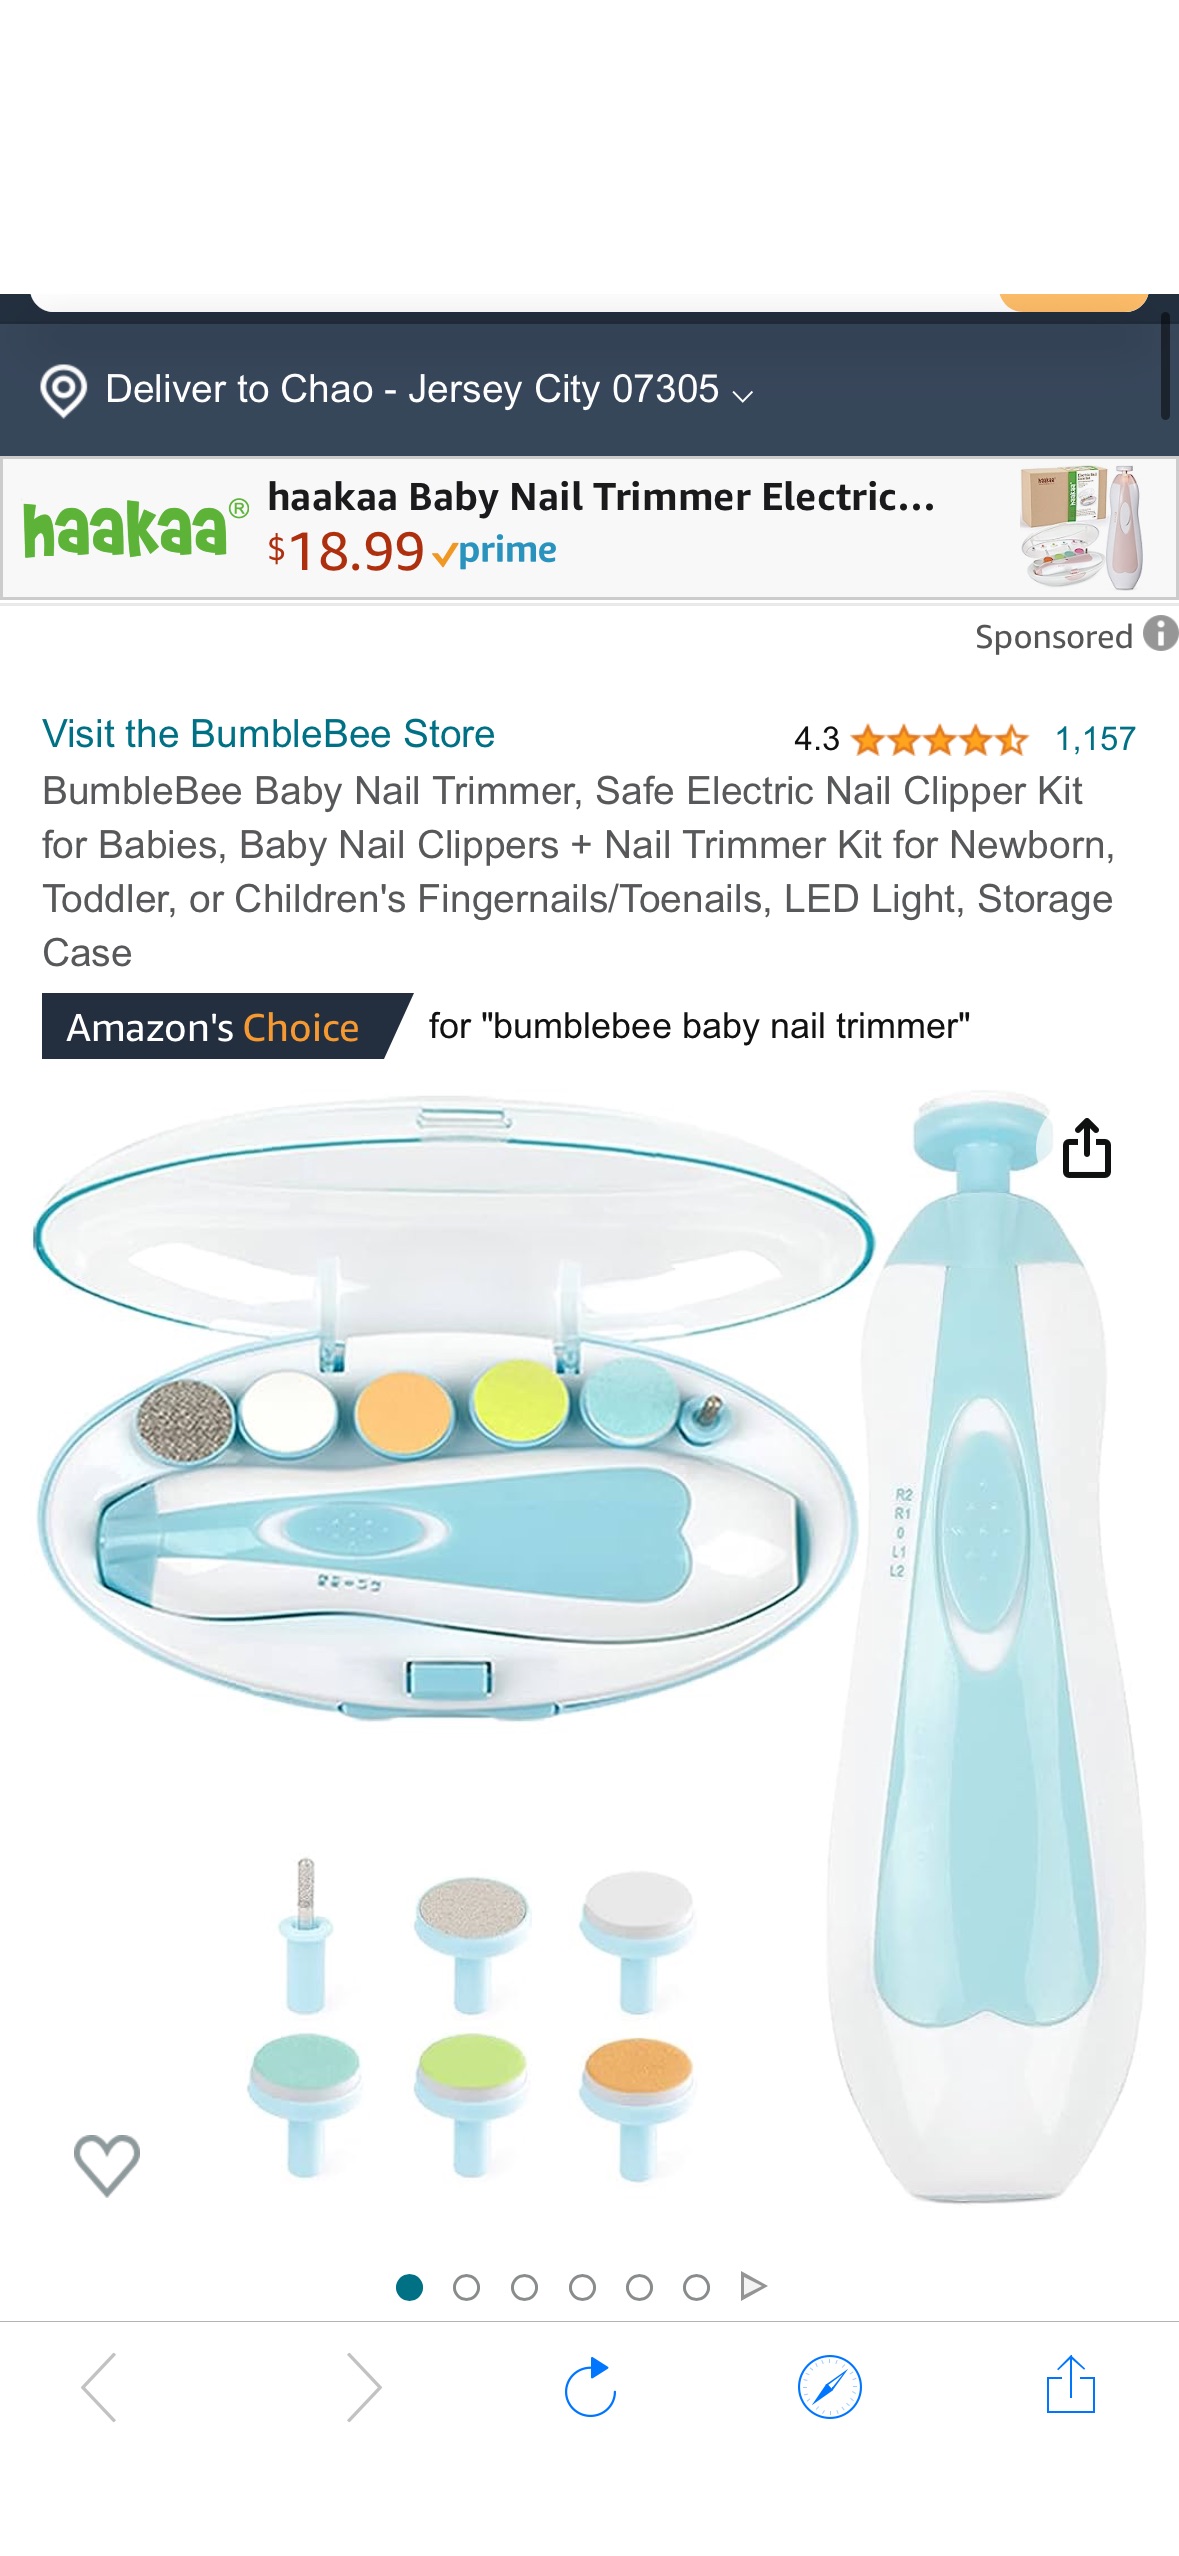 Amazon.com : BumbleBee Baby Nail Trimmer, Safe Electric Nail Clipper Kit for Babies, Baby Nail Clippers + Nail Trimmer Kit for Newborn, Toddler, or Children's Fingernails/Toenails, LED Light, Storage 